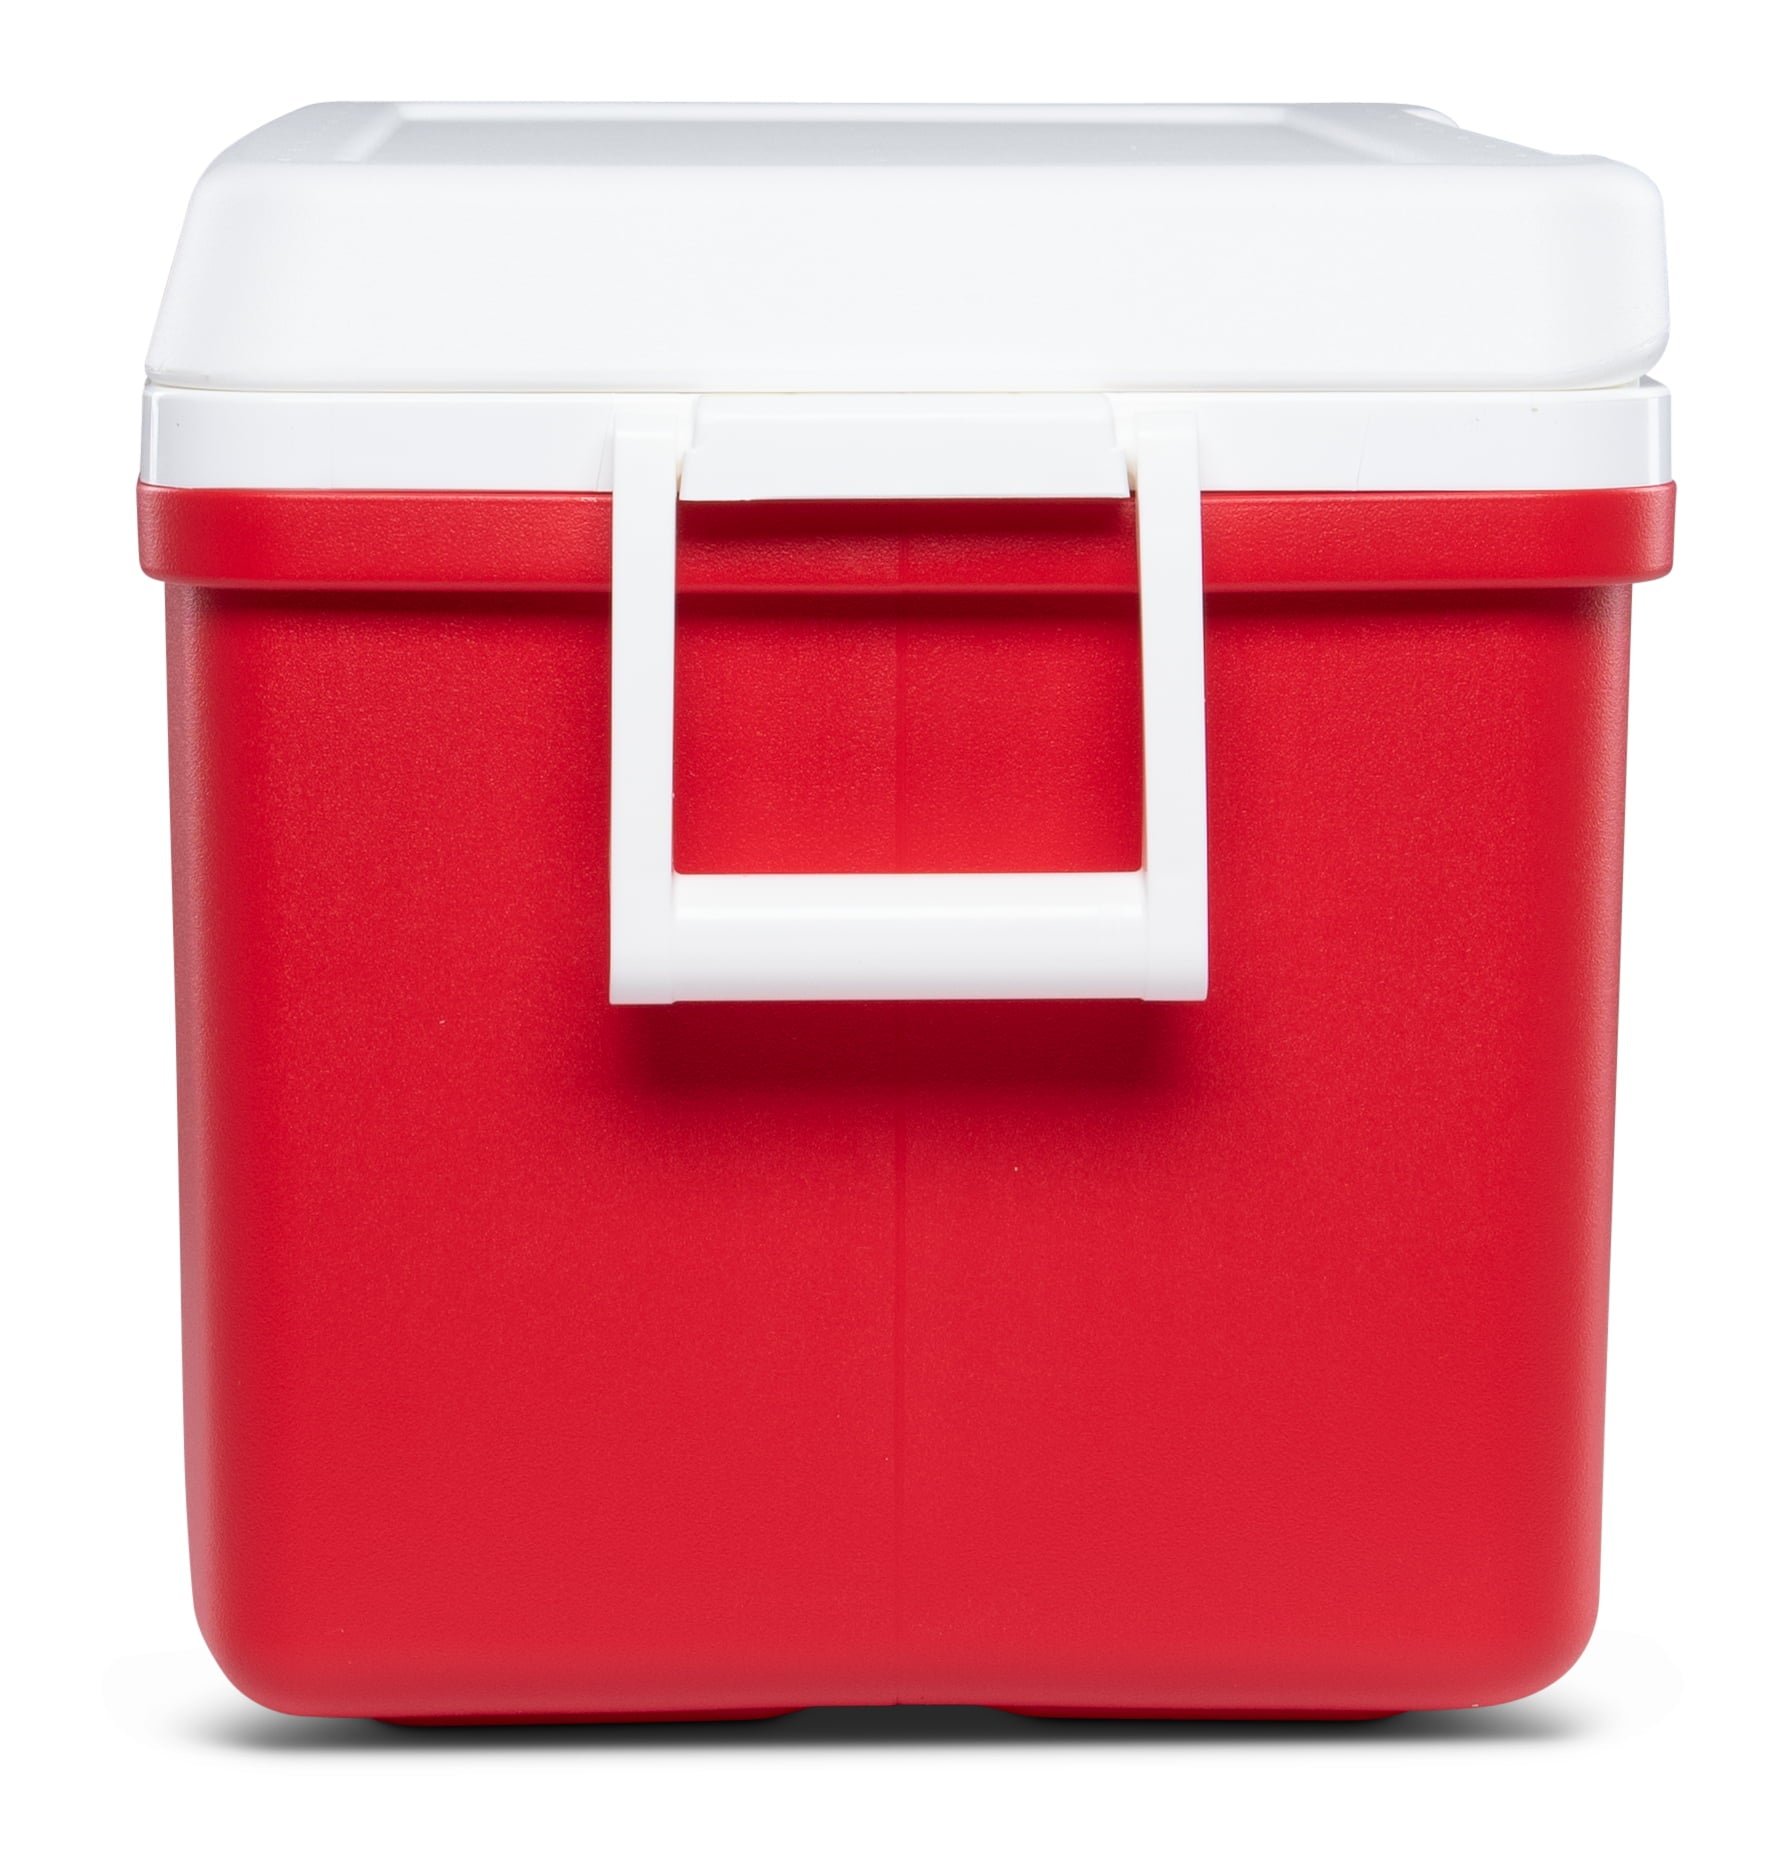 Igloo 48 qt. Laguna Ice Chest Cooler, Red – HardGrizzly